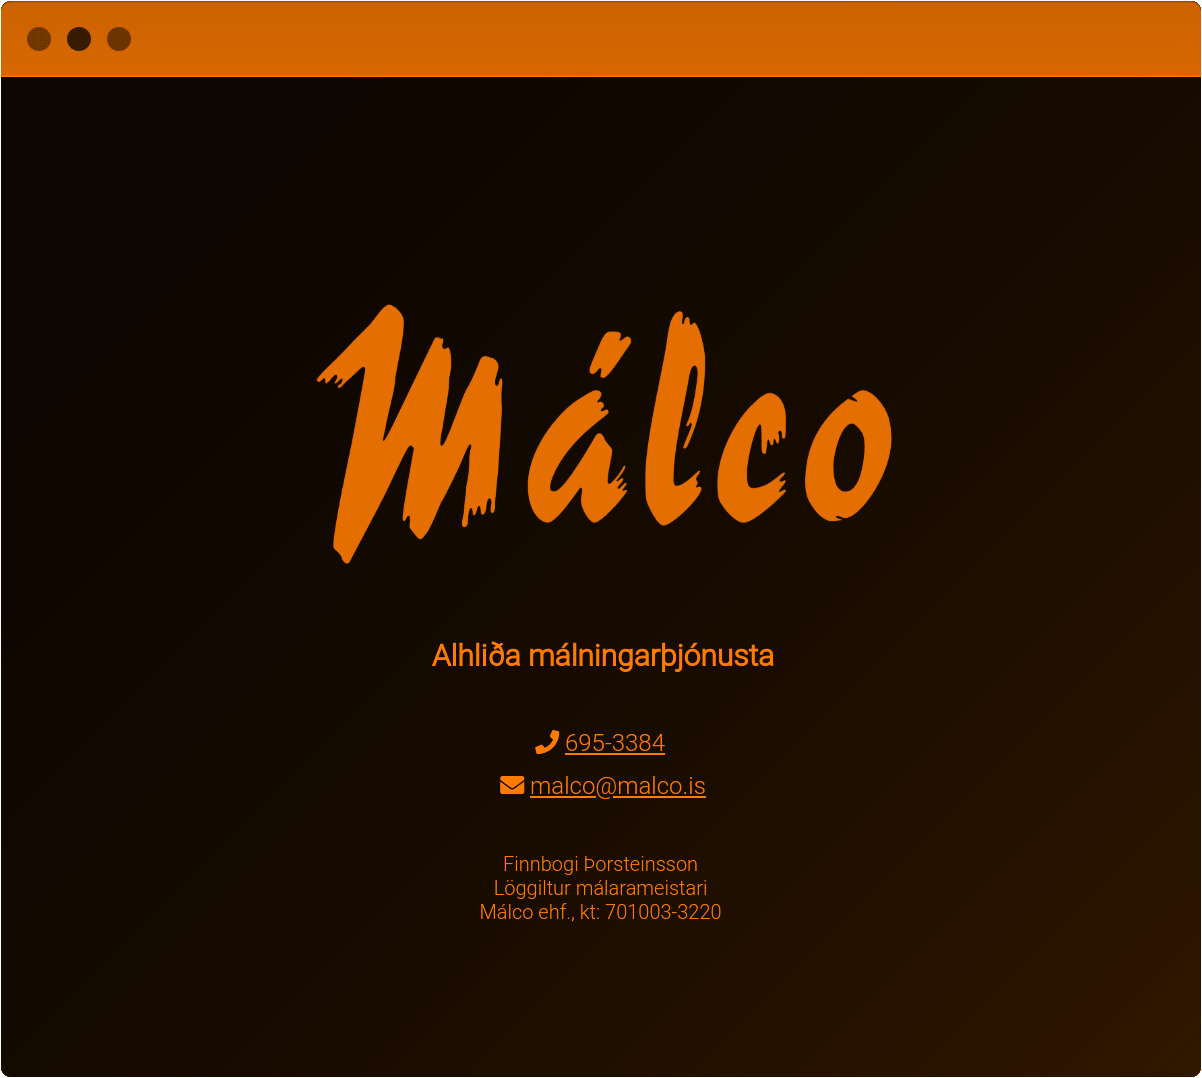 Screenshot from malco.is, a simple site with contact details